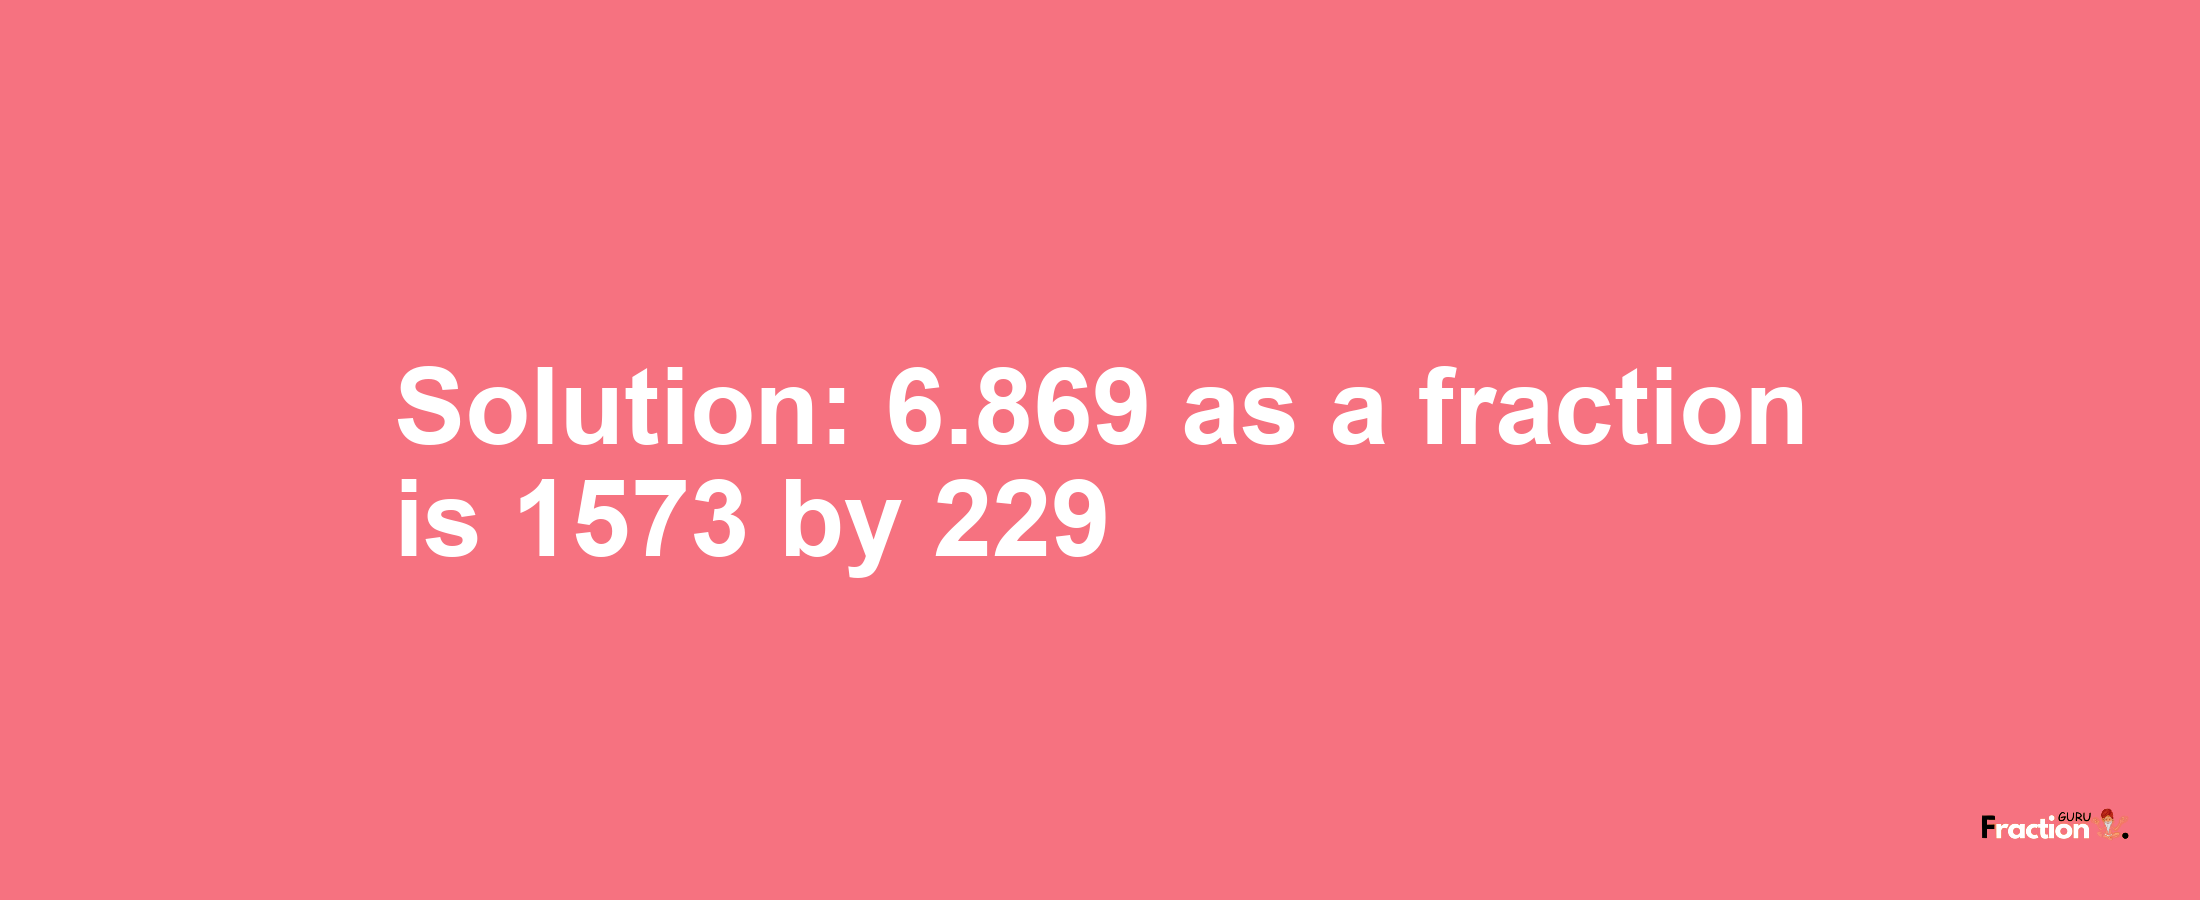 Solution:6.869 as a fraction is 1573/229